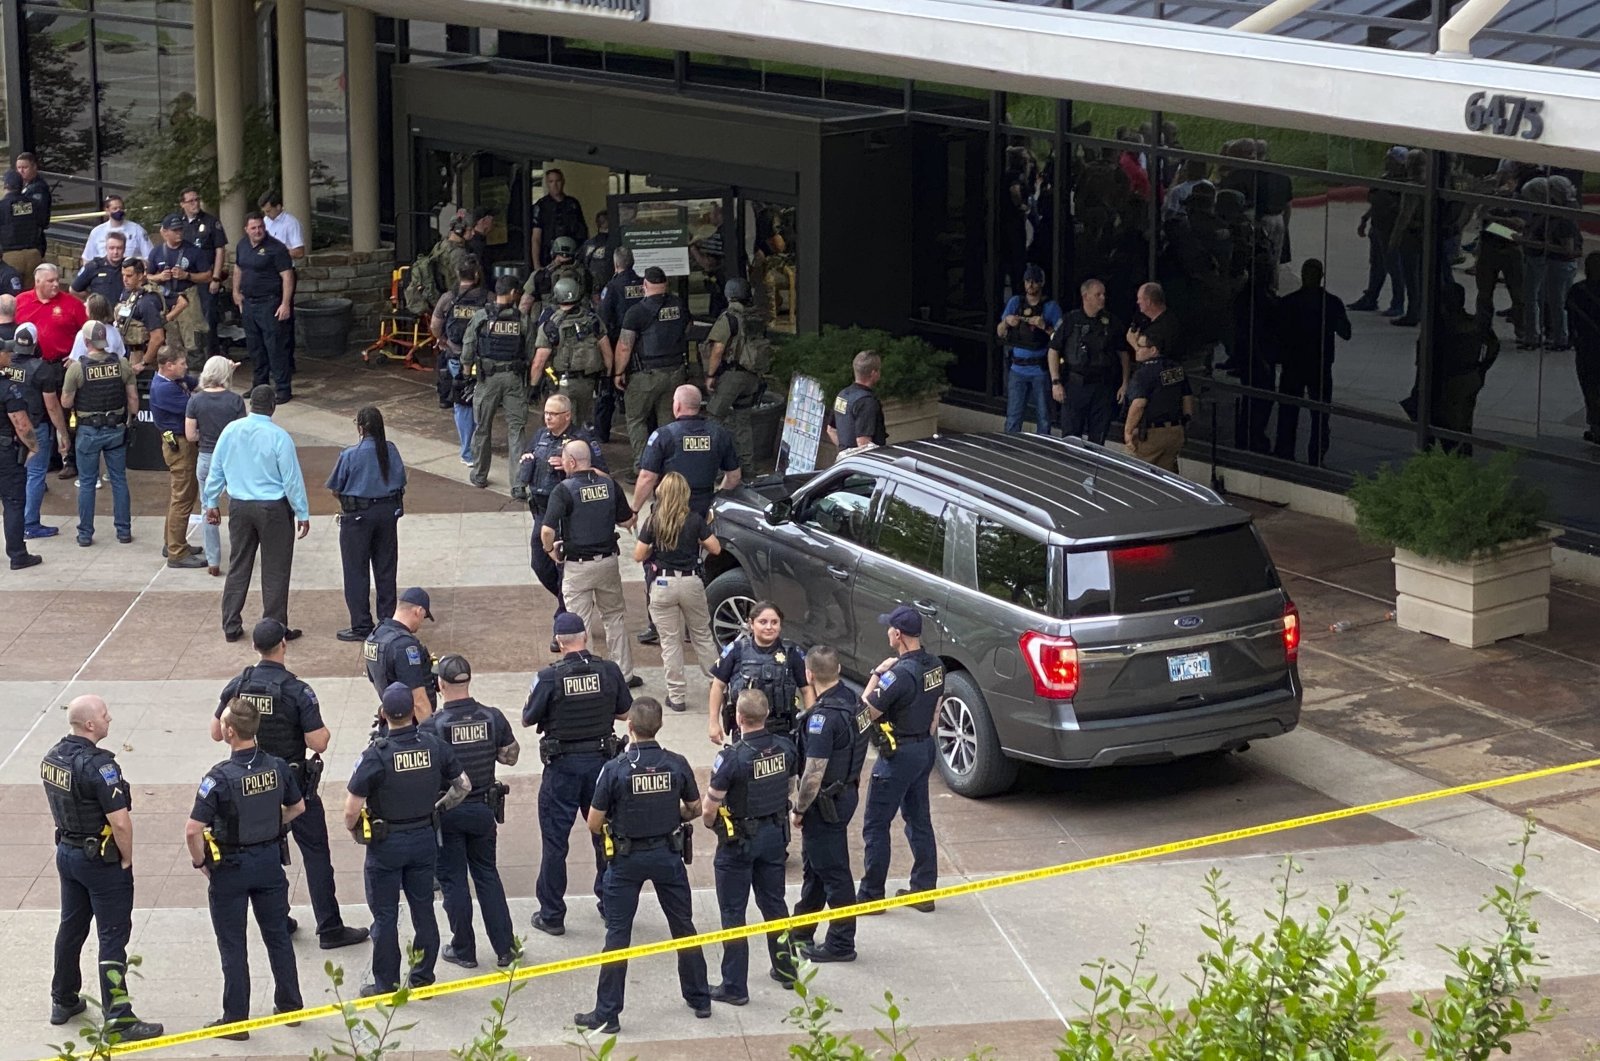 Emergency personnel respond to a shooting at the Natalie Medical Building in Tulsa, Oklahoma, U.S., June 1, 2022. (Tulsa World via AP)